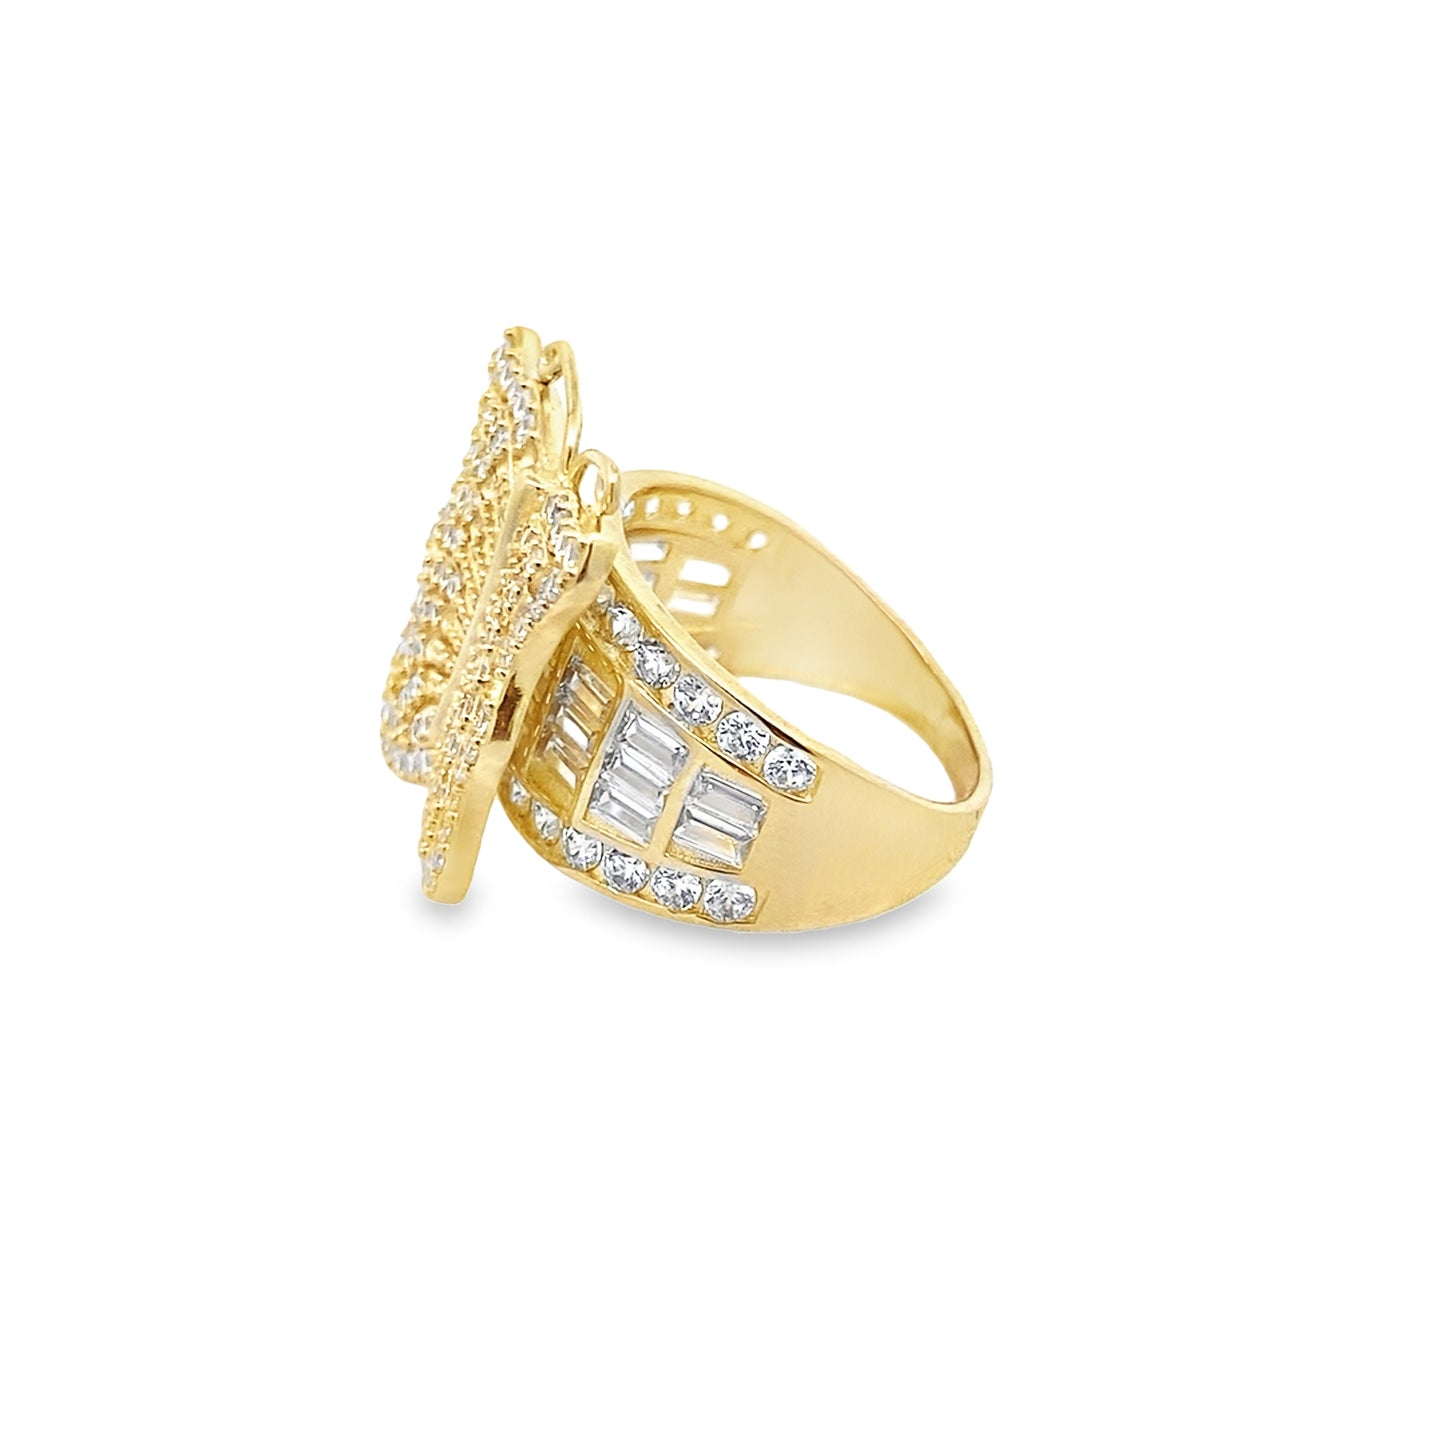 14K Yellow Gold Ladies Cz Butterfly Ring Size 7.5 4.3Dwt